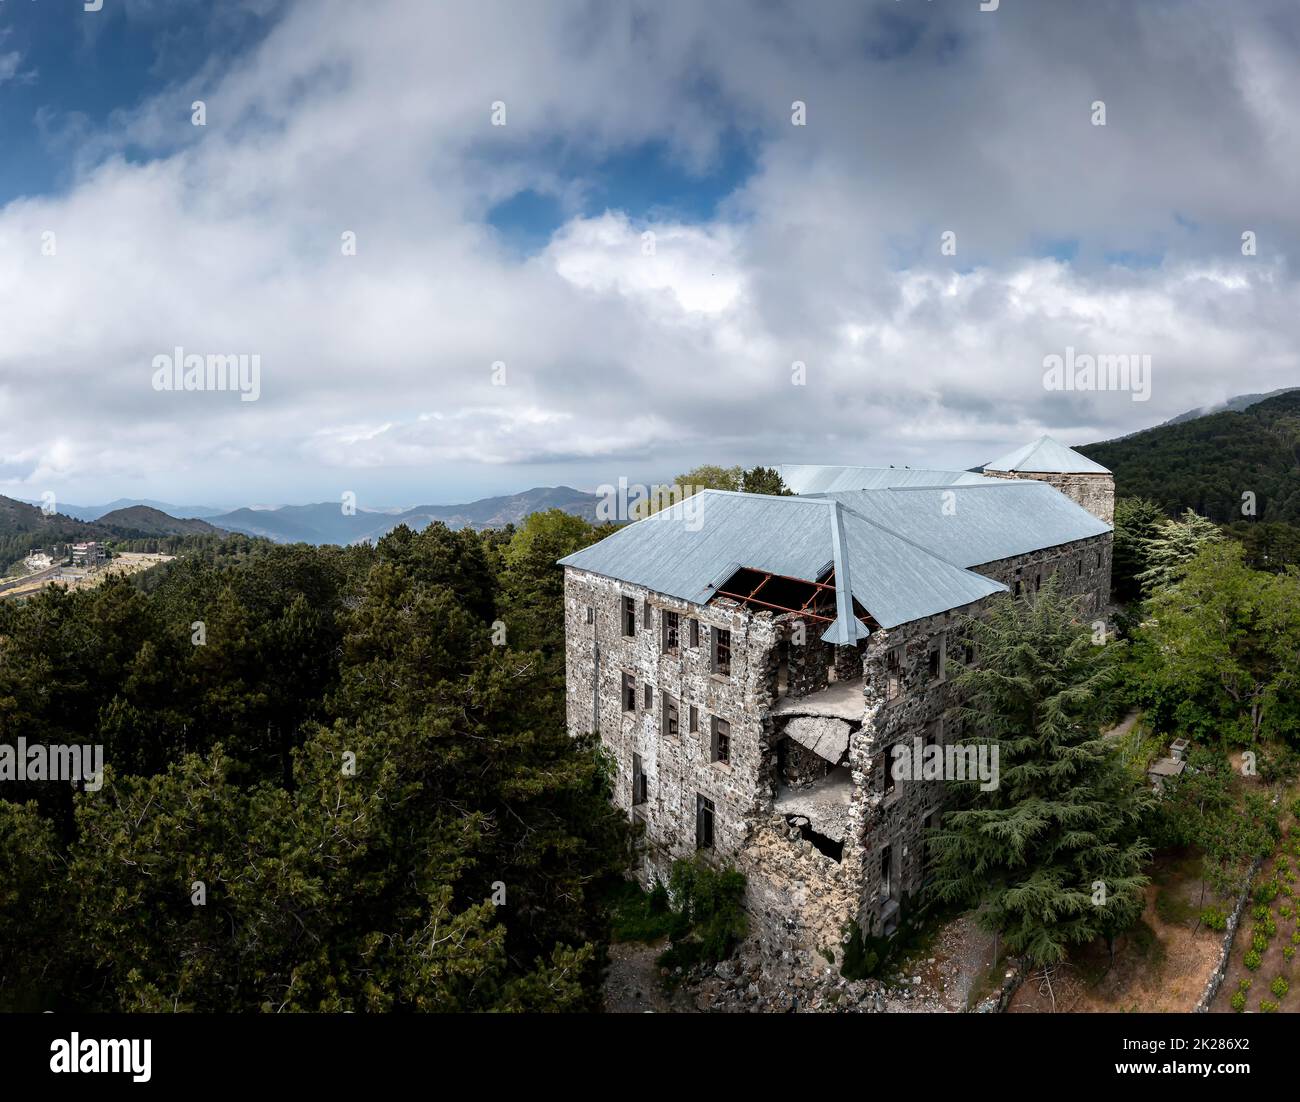 Birds eye view of old abandoned stone built building in mountain forest Stock Photo